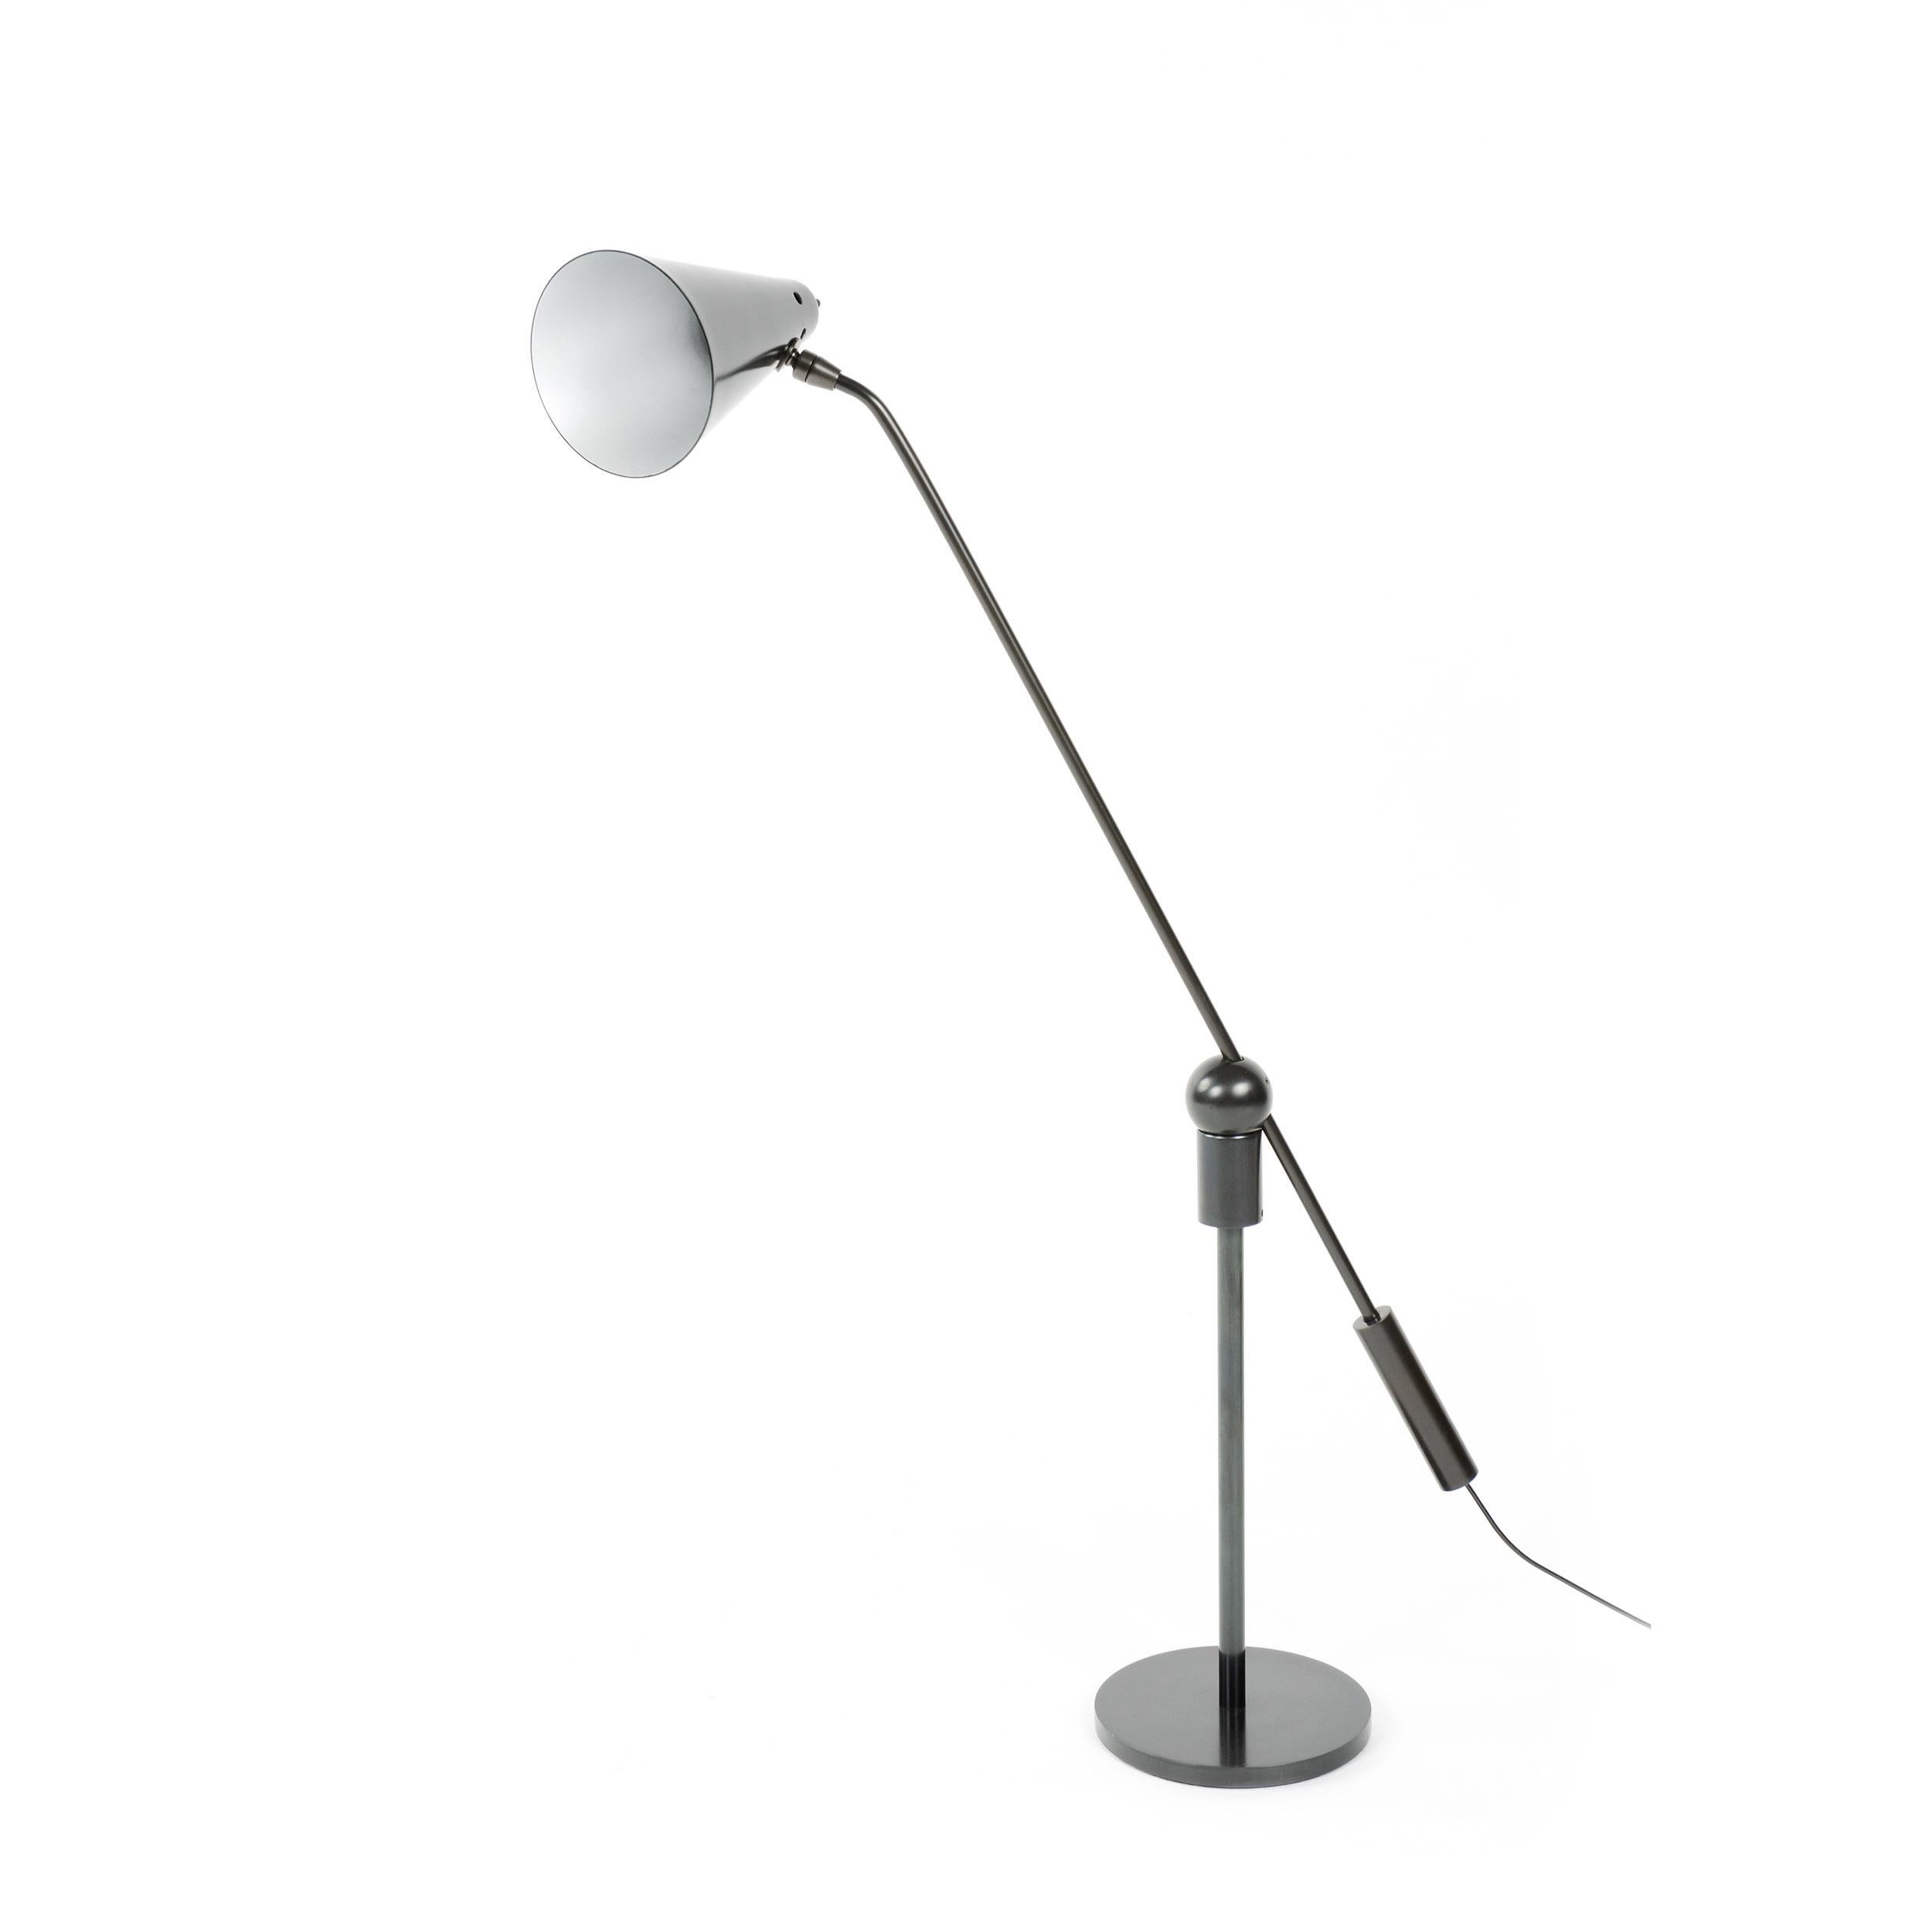 An uncommon patinated steel desk lamp with an adjustable lacquered conical shade. The arm is attached to a circular magnet ball and socket connection, allowing for a high degree of articulation and movement.